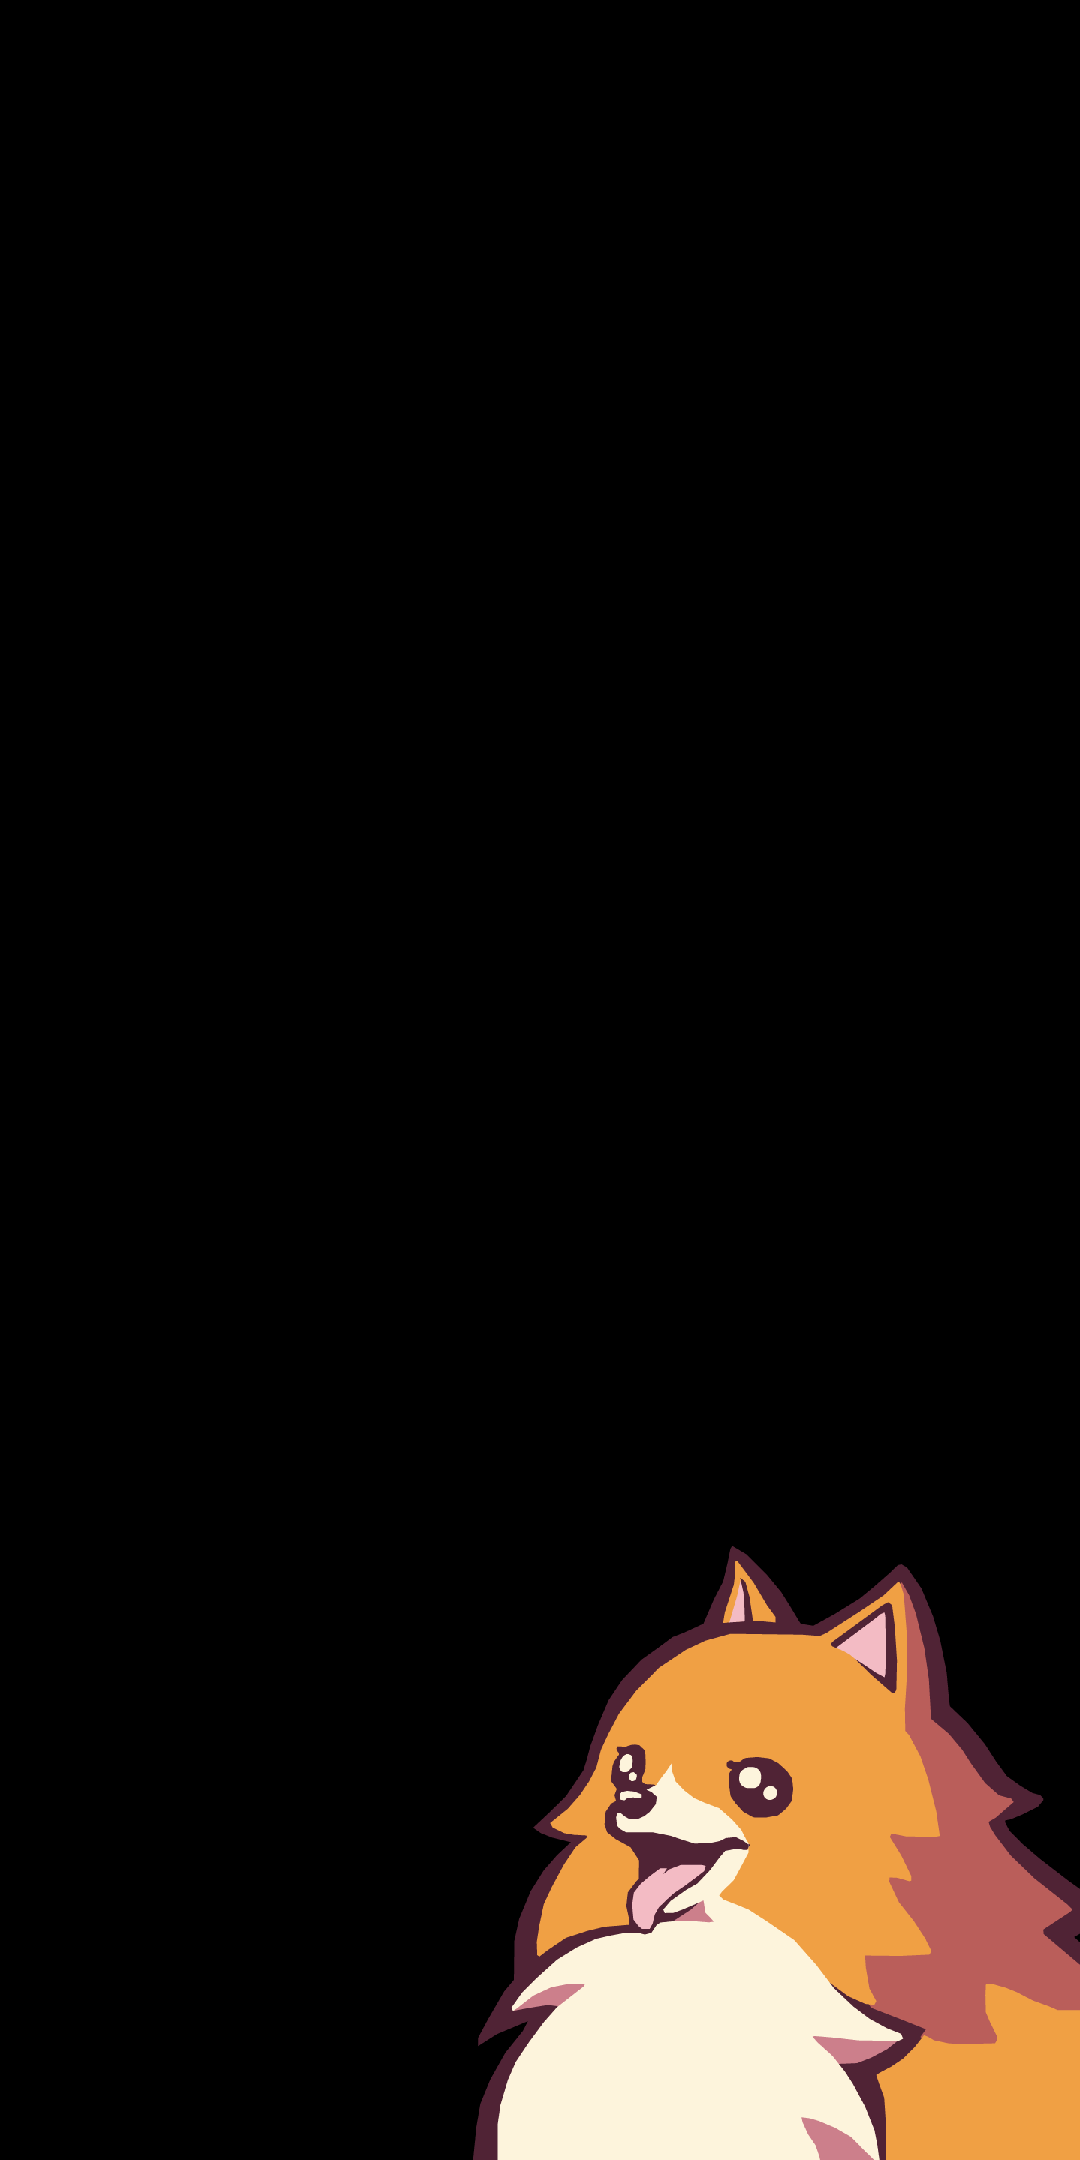 Made a simple phone wallpaper of this good boy from Ghost Trick